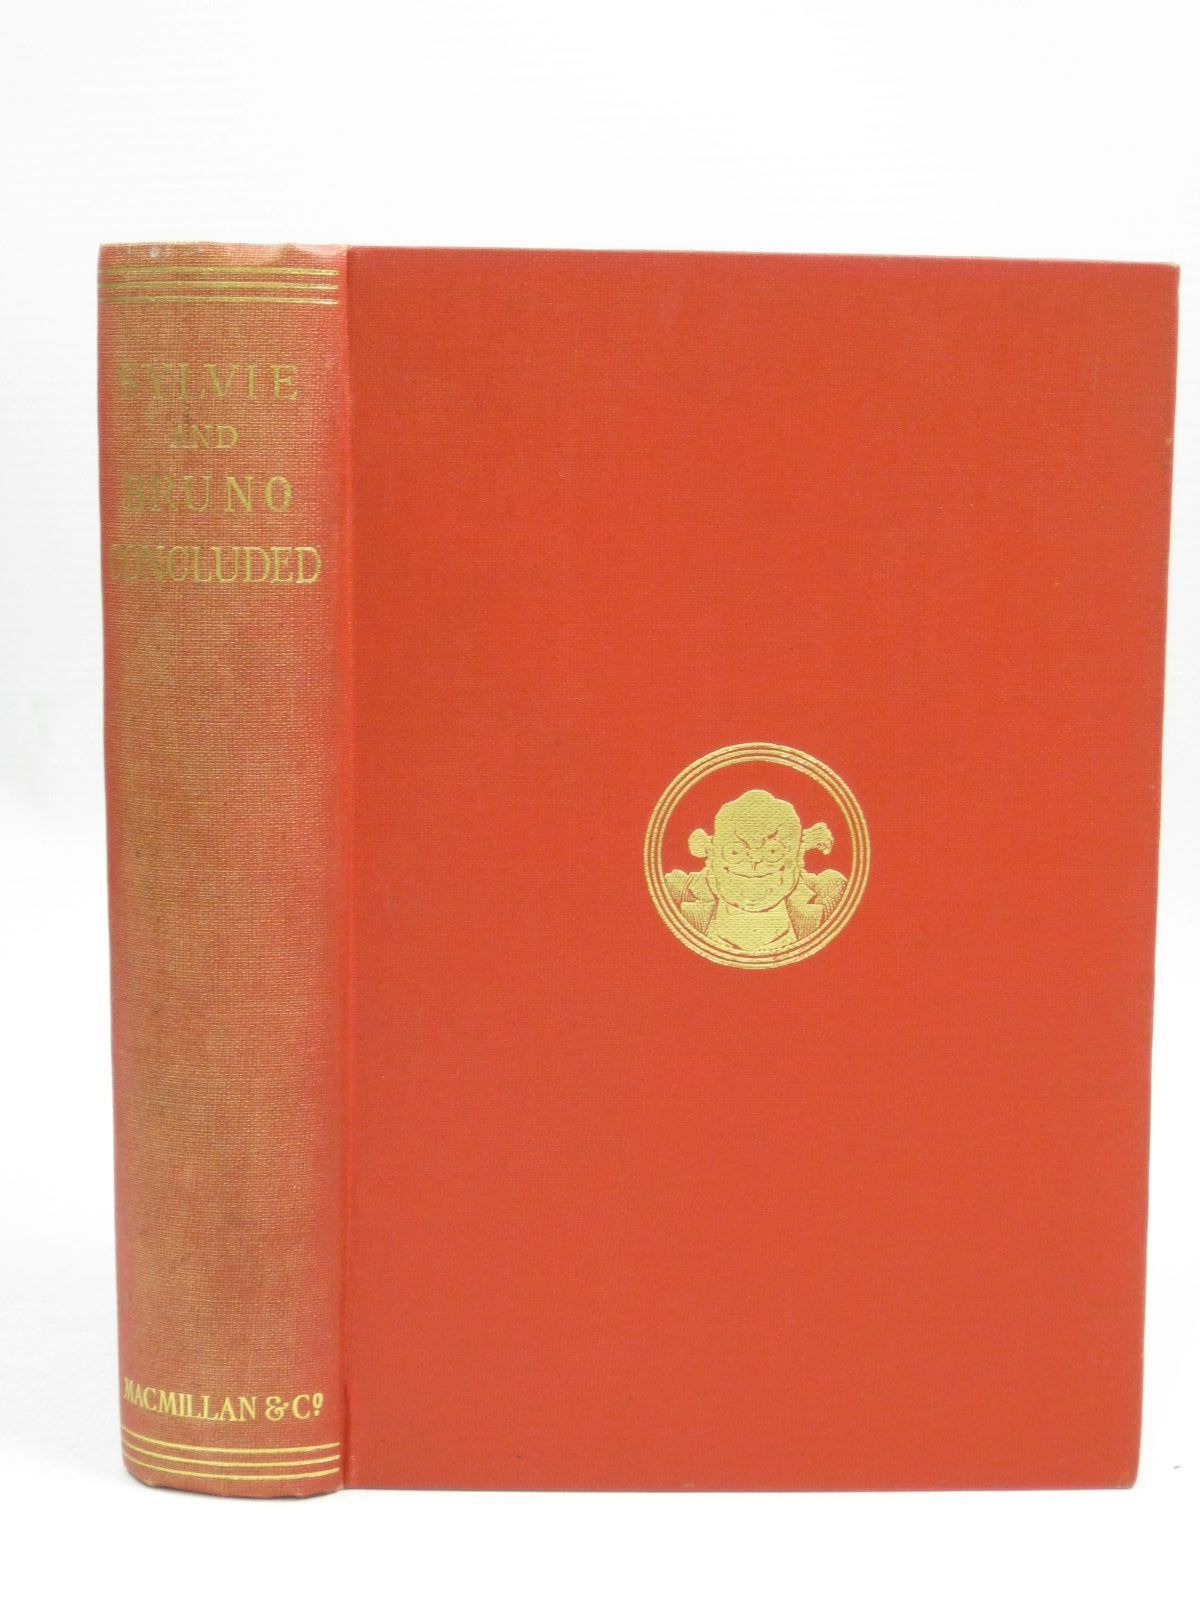 Photo of SYLVIE AND BRUNO CONCLUDED written by Carroll, Lewis illustrated by Furniss, Harry published by Macmillan &amp; Co. (STOCK CODE: 1405774)  for sale by Stella & Rose's Books